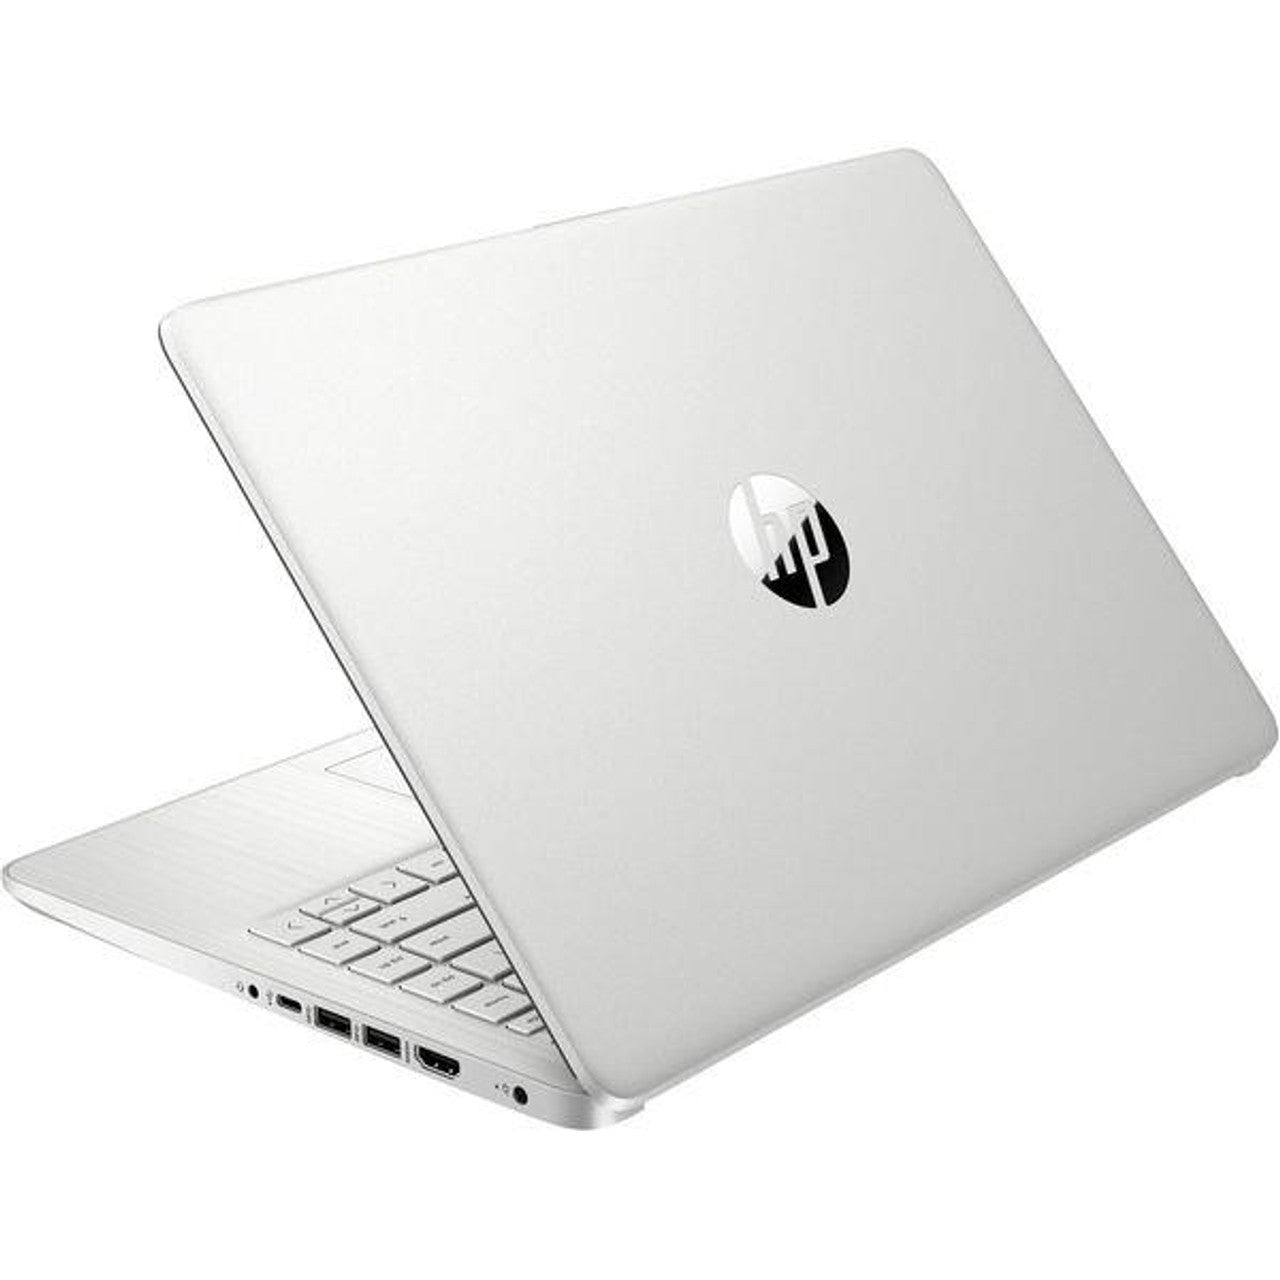 HP 14S-DQ2507SA 14" Laptop Intel Core i3 4GB RAM 128GB SSD - Silver - Refurbished Excellent